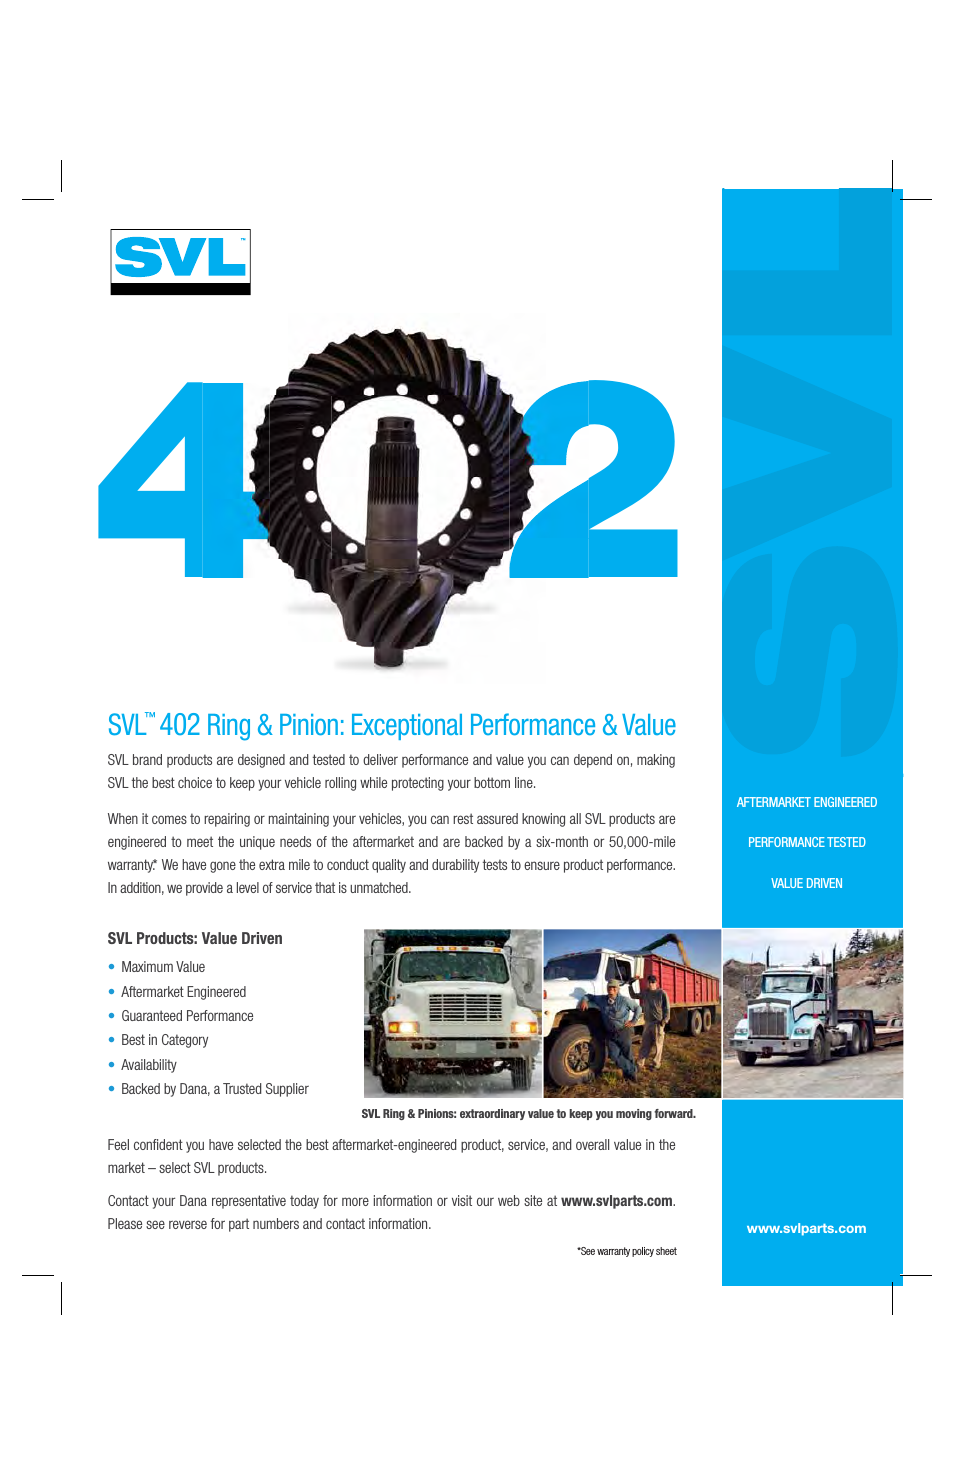 SVL 402 Ring & Pinion: Exceptional Performance & Value